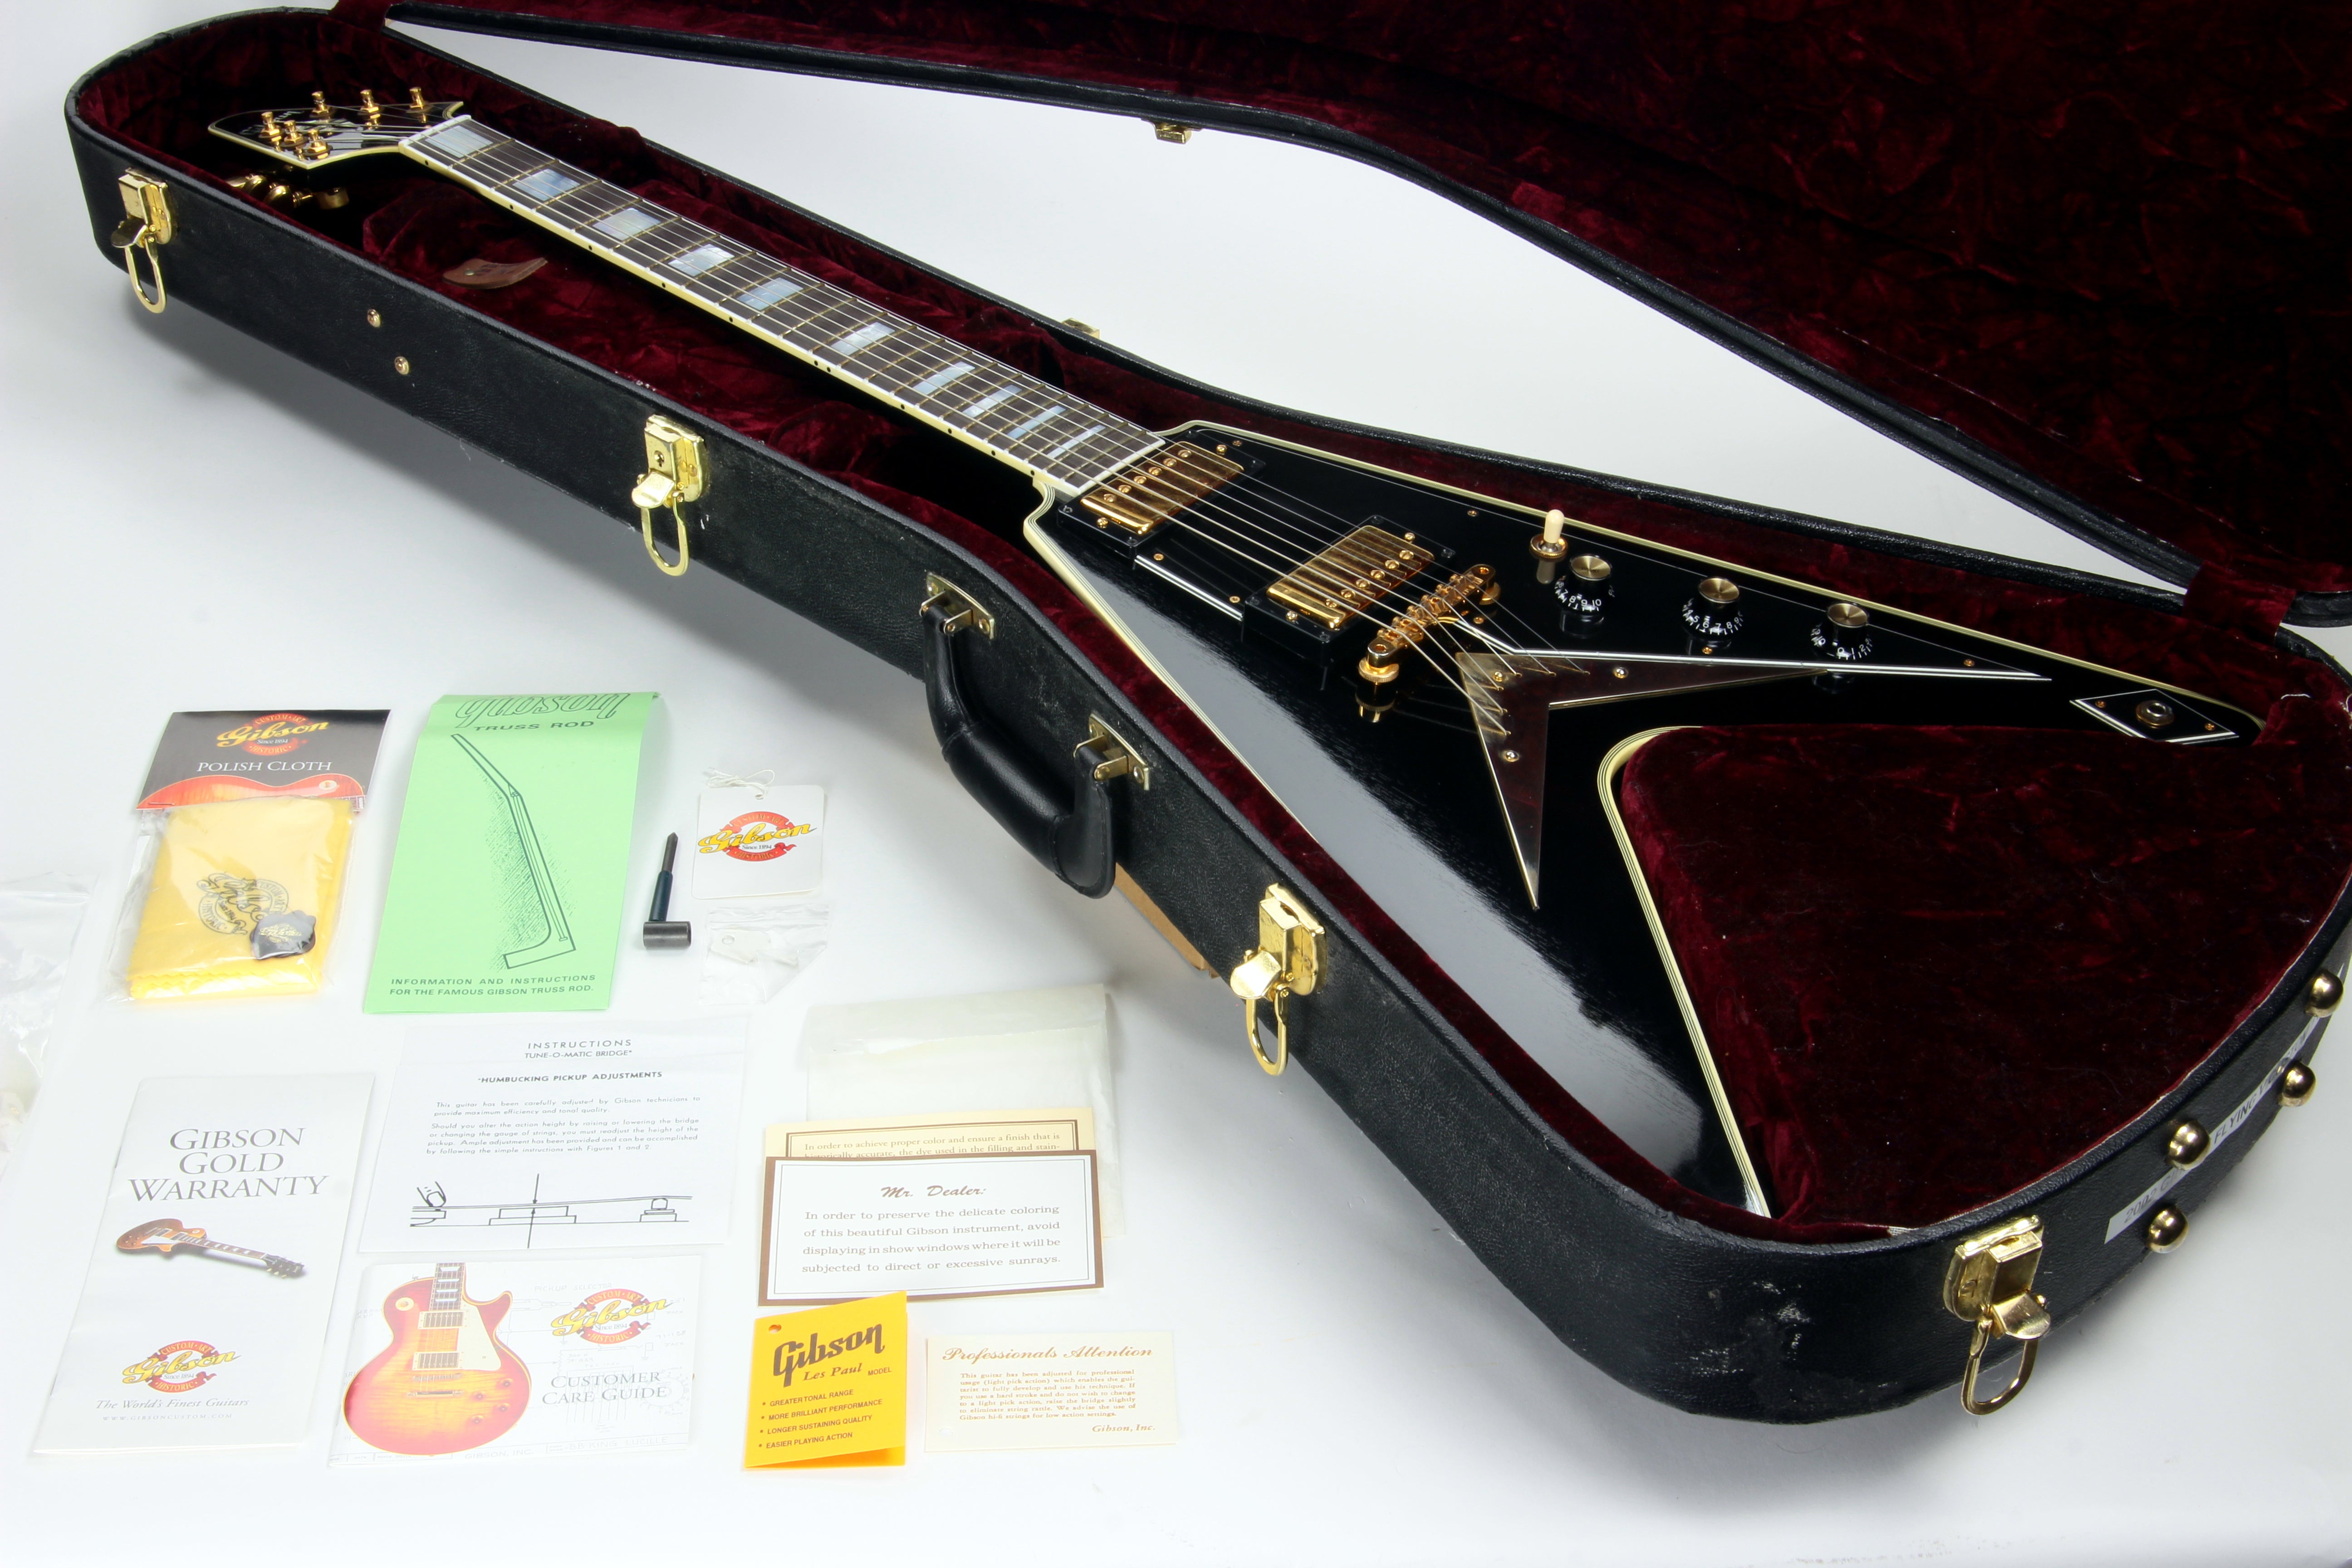 *SOLD*  2002 Gibson Flying V Custom Shop Ebony Fingerboard Black Limited Edition Historic - Only 40 Made!